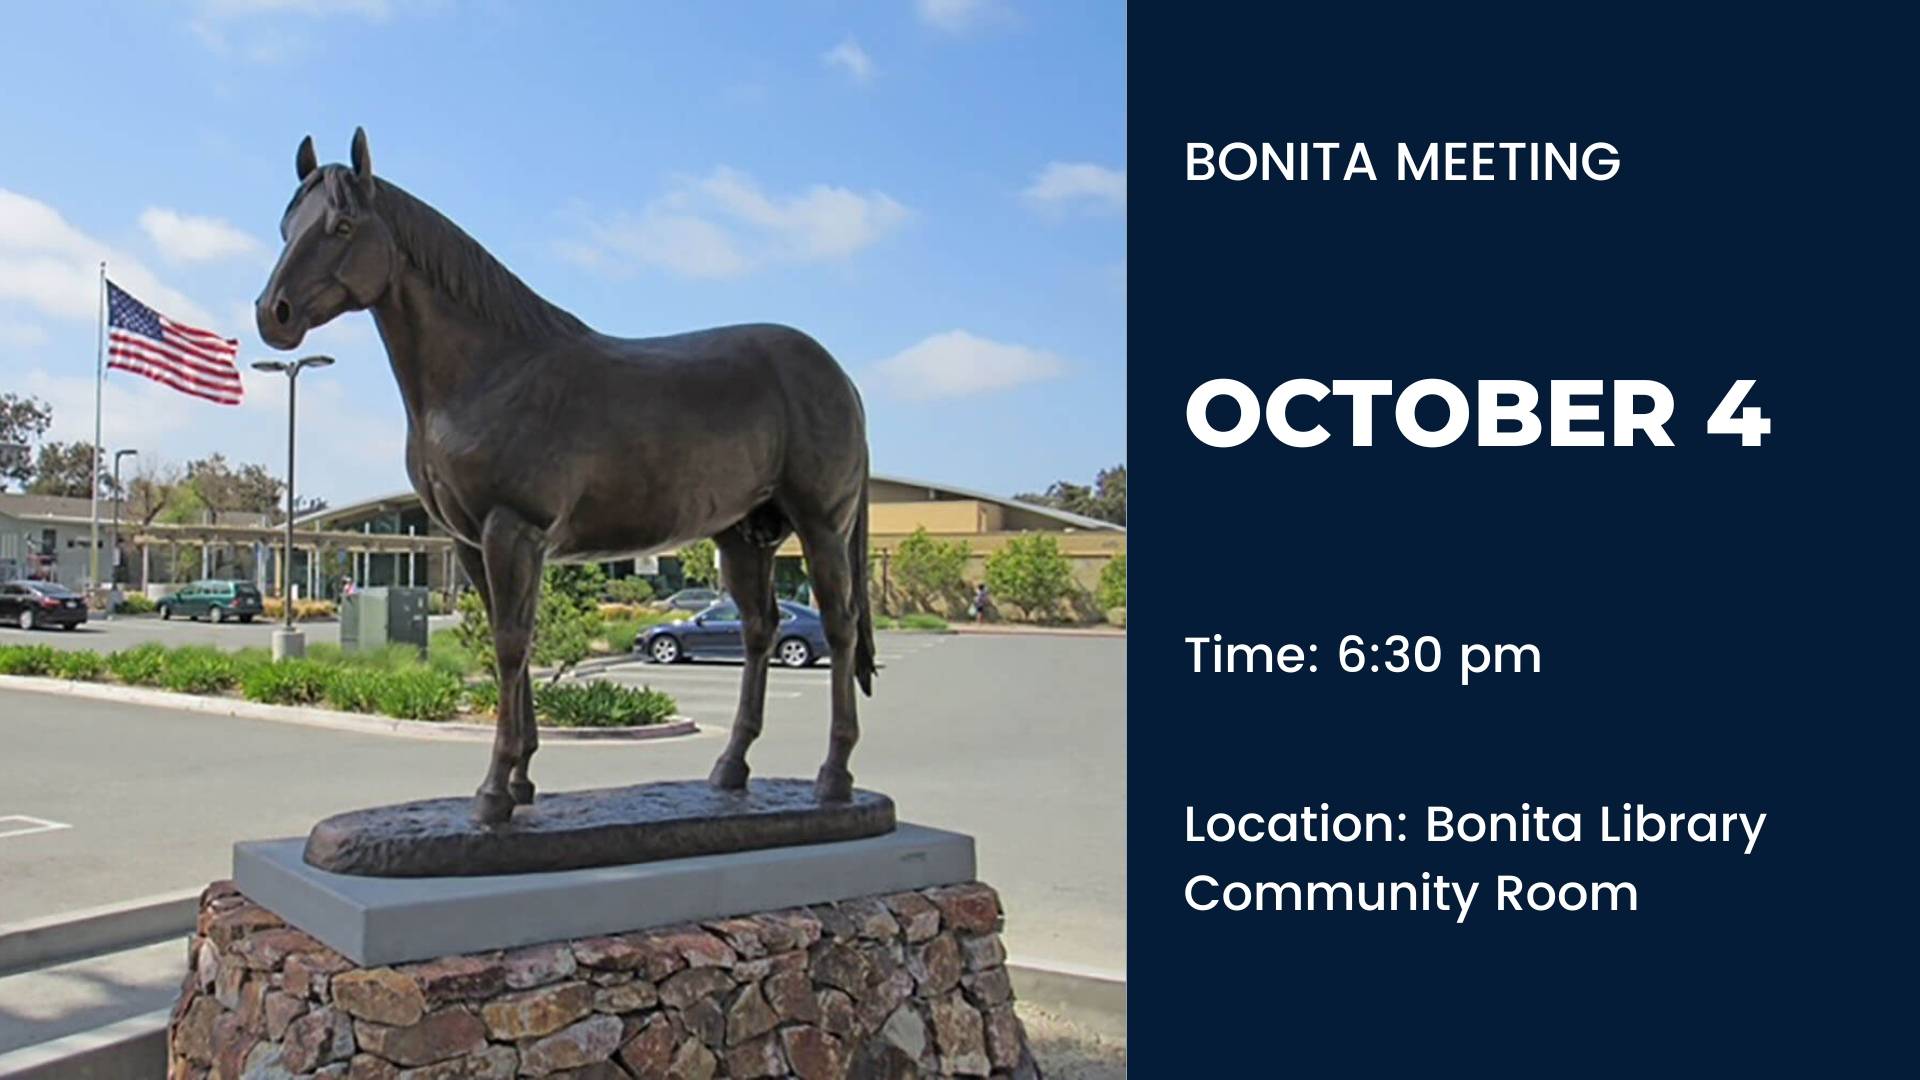 Please join the SVCA for their upcoming October 4th meeting to discuss news and important information on community topics. Read more.